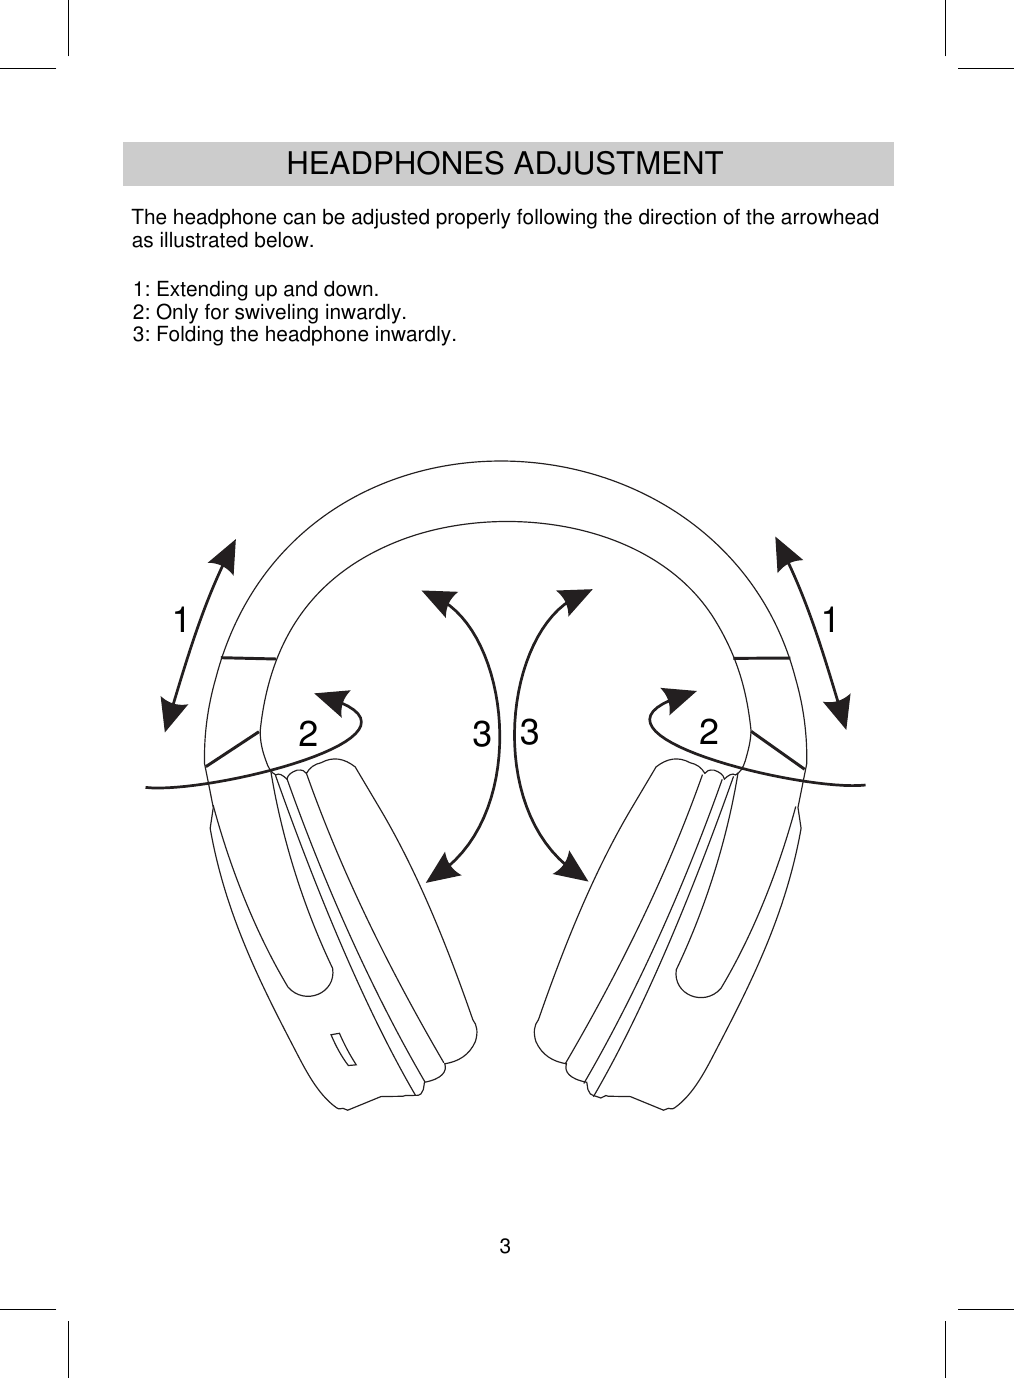 The headphone can be adjusted properly following the direction of the arrowhead as illustrated below.1231231: Extending up and down.2: Only for swiveling inwardly.3: Folding the headphone inwardly.HEADPHONES ADJUSTMENT3